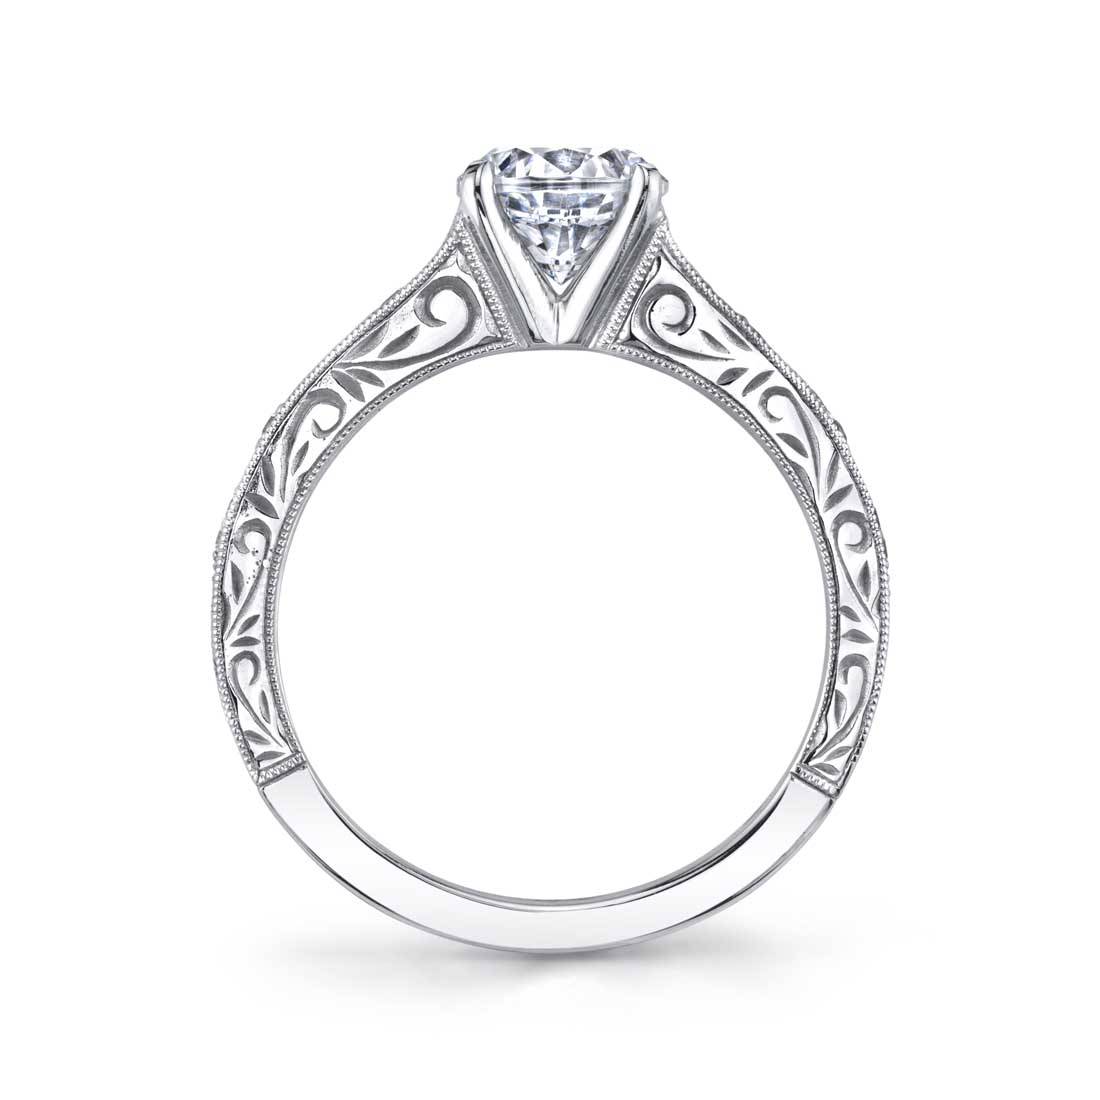 Hand Engraved Vintage Inspired Engagement Ring